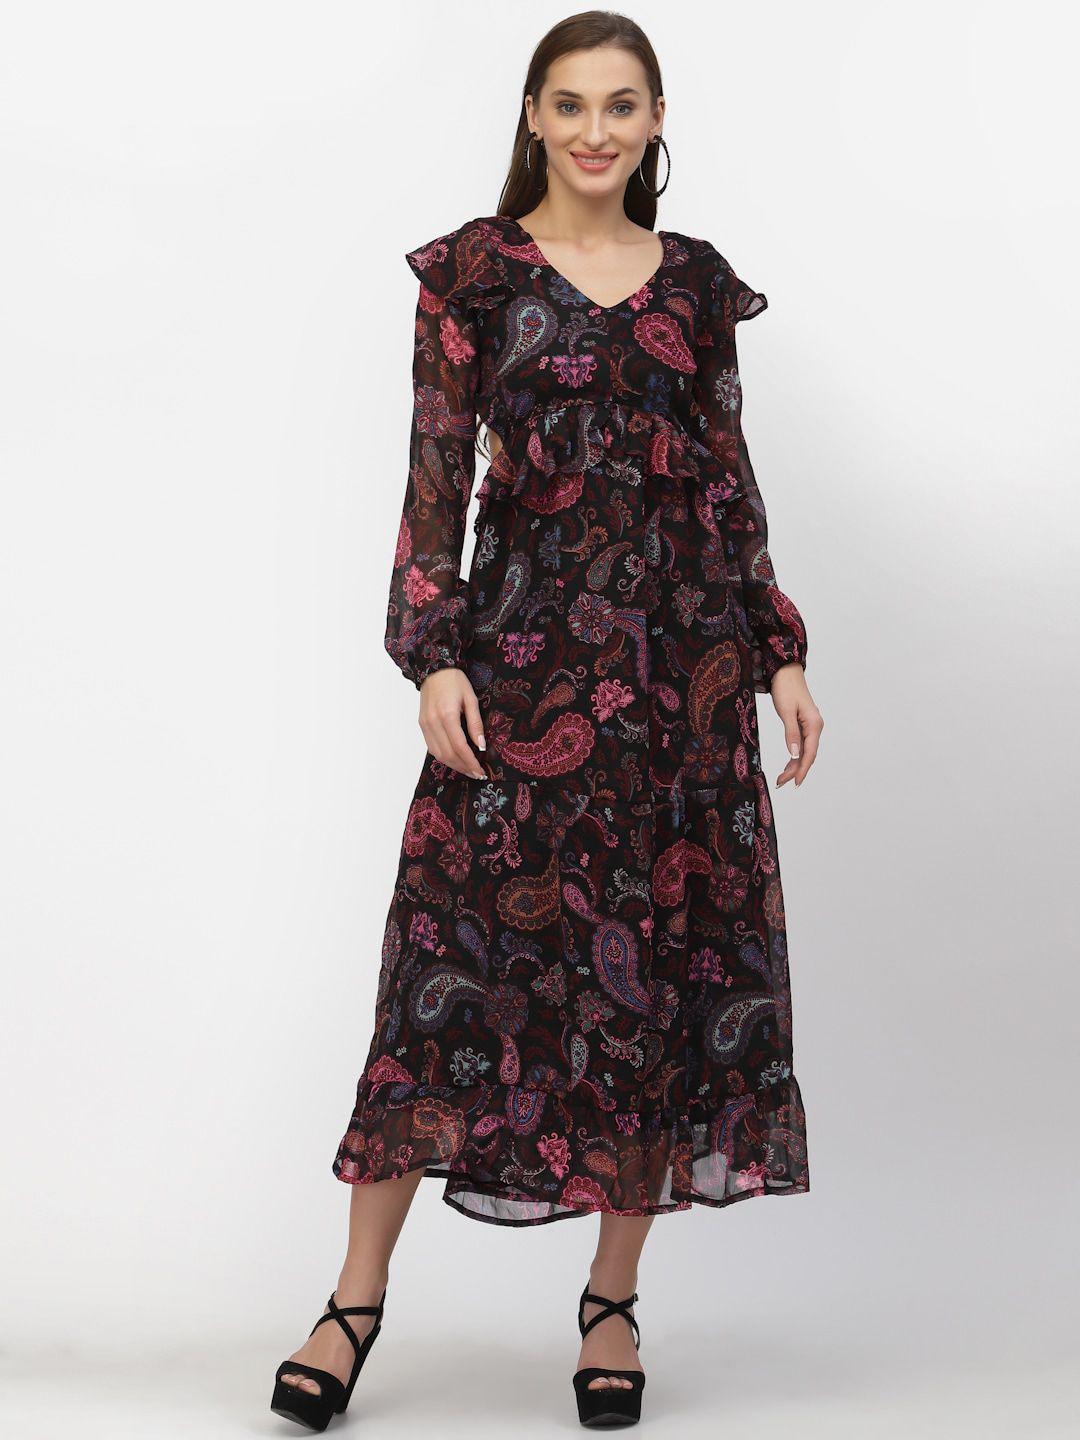 flawless bishop sleeves ethnic motifs printed midi dress comes with a scrunchie